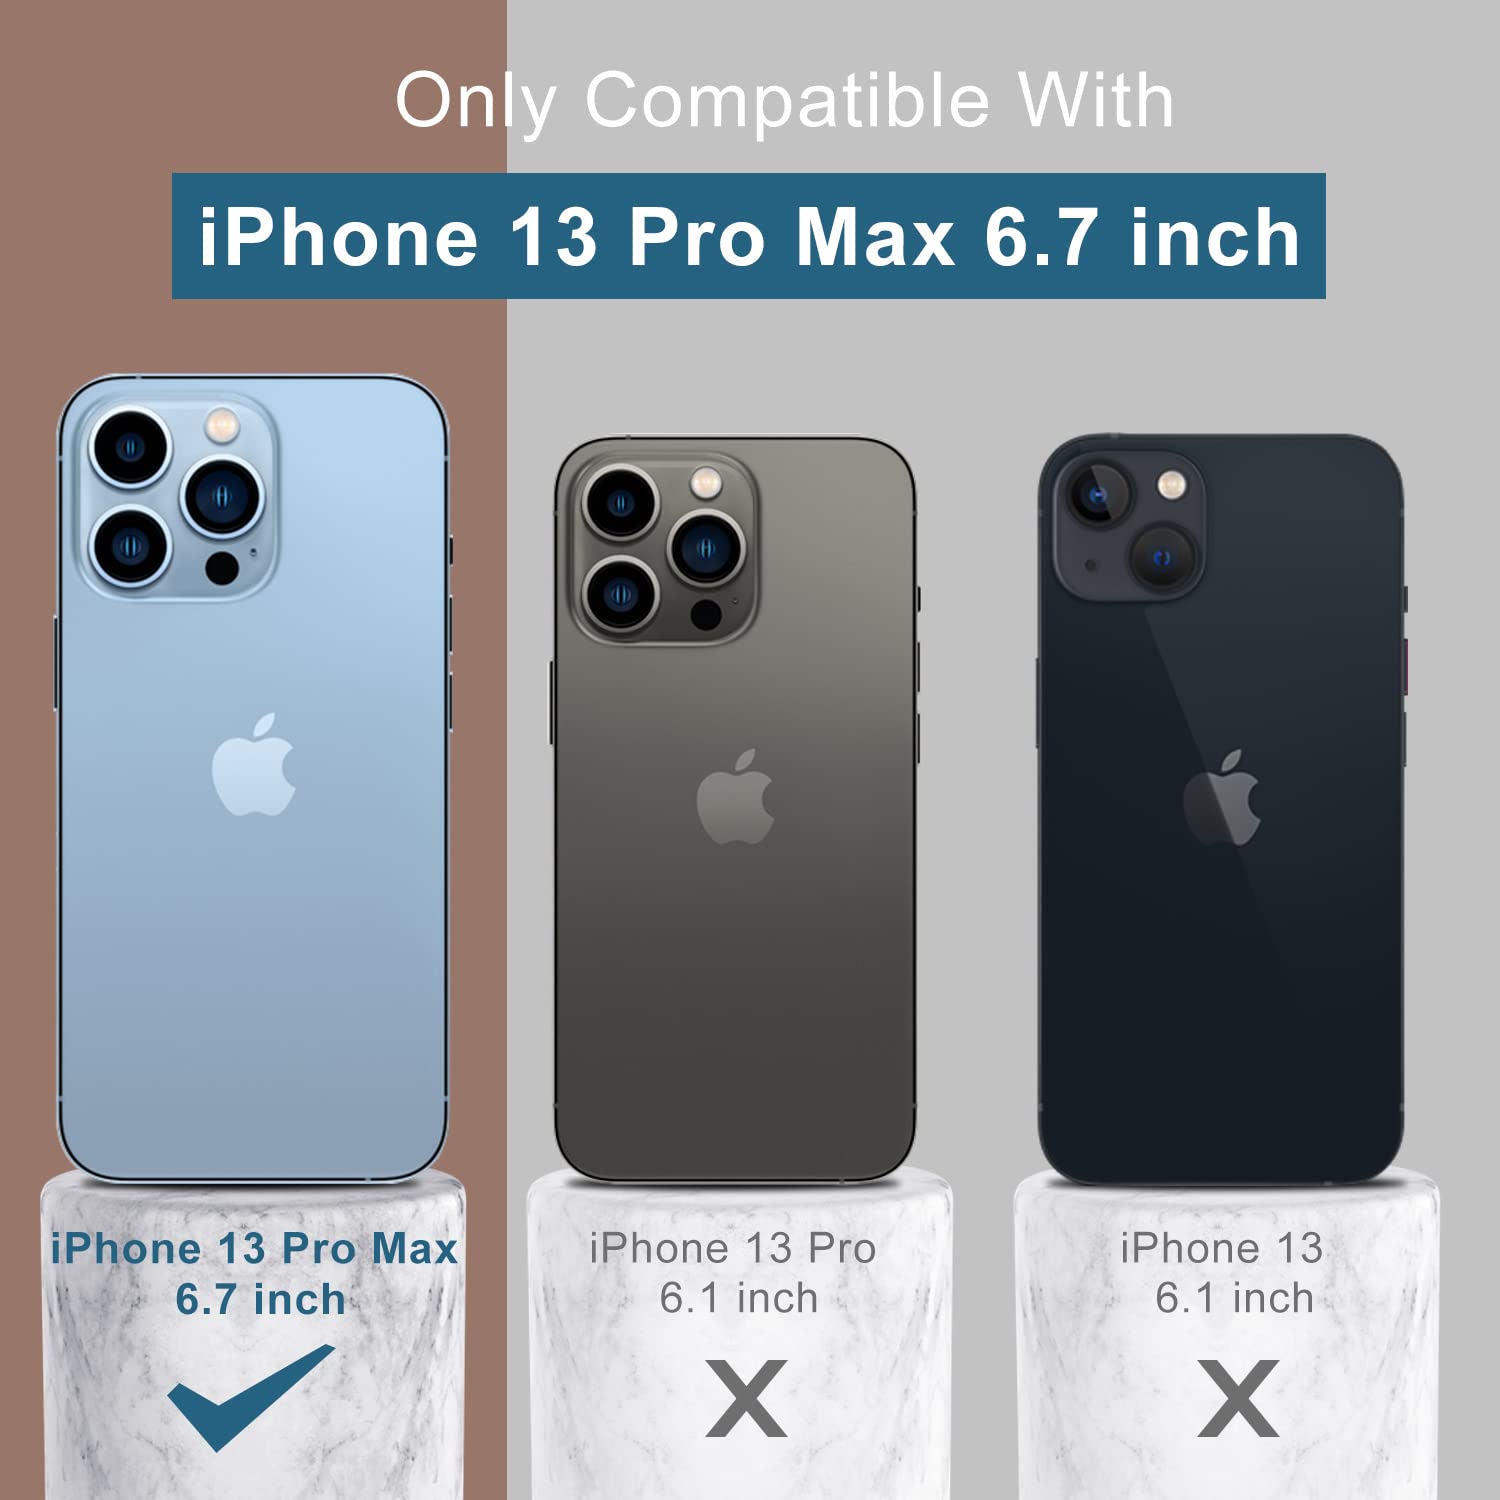 DEENAKIN iPhone 13 Pro Max Case with Screen Protector,Pass 16ft Drop Tested Durable Soft Silicone Gel Rubber Cover,Slim Fit Protective Phone Case for iPhone 13 Pro Max 6.7